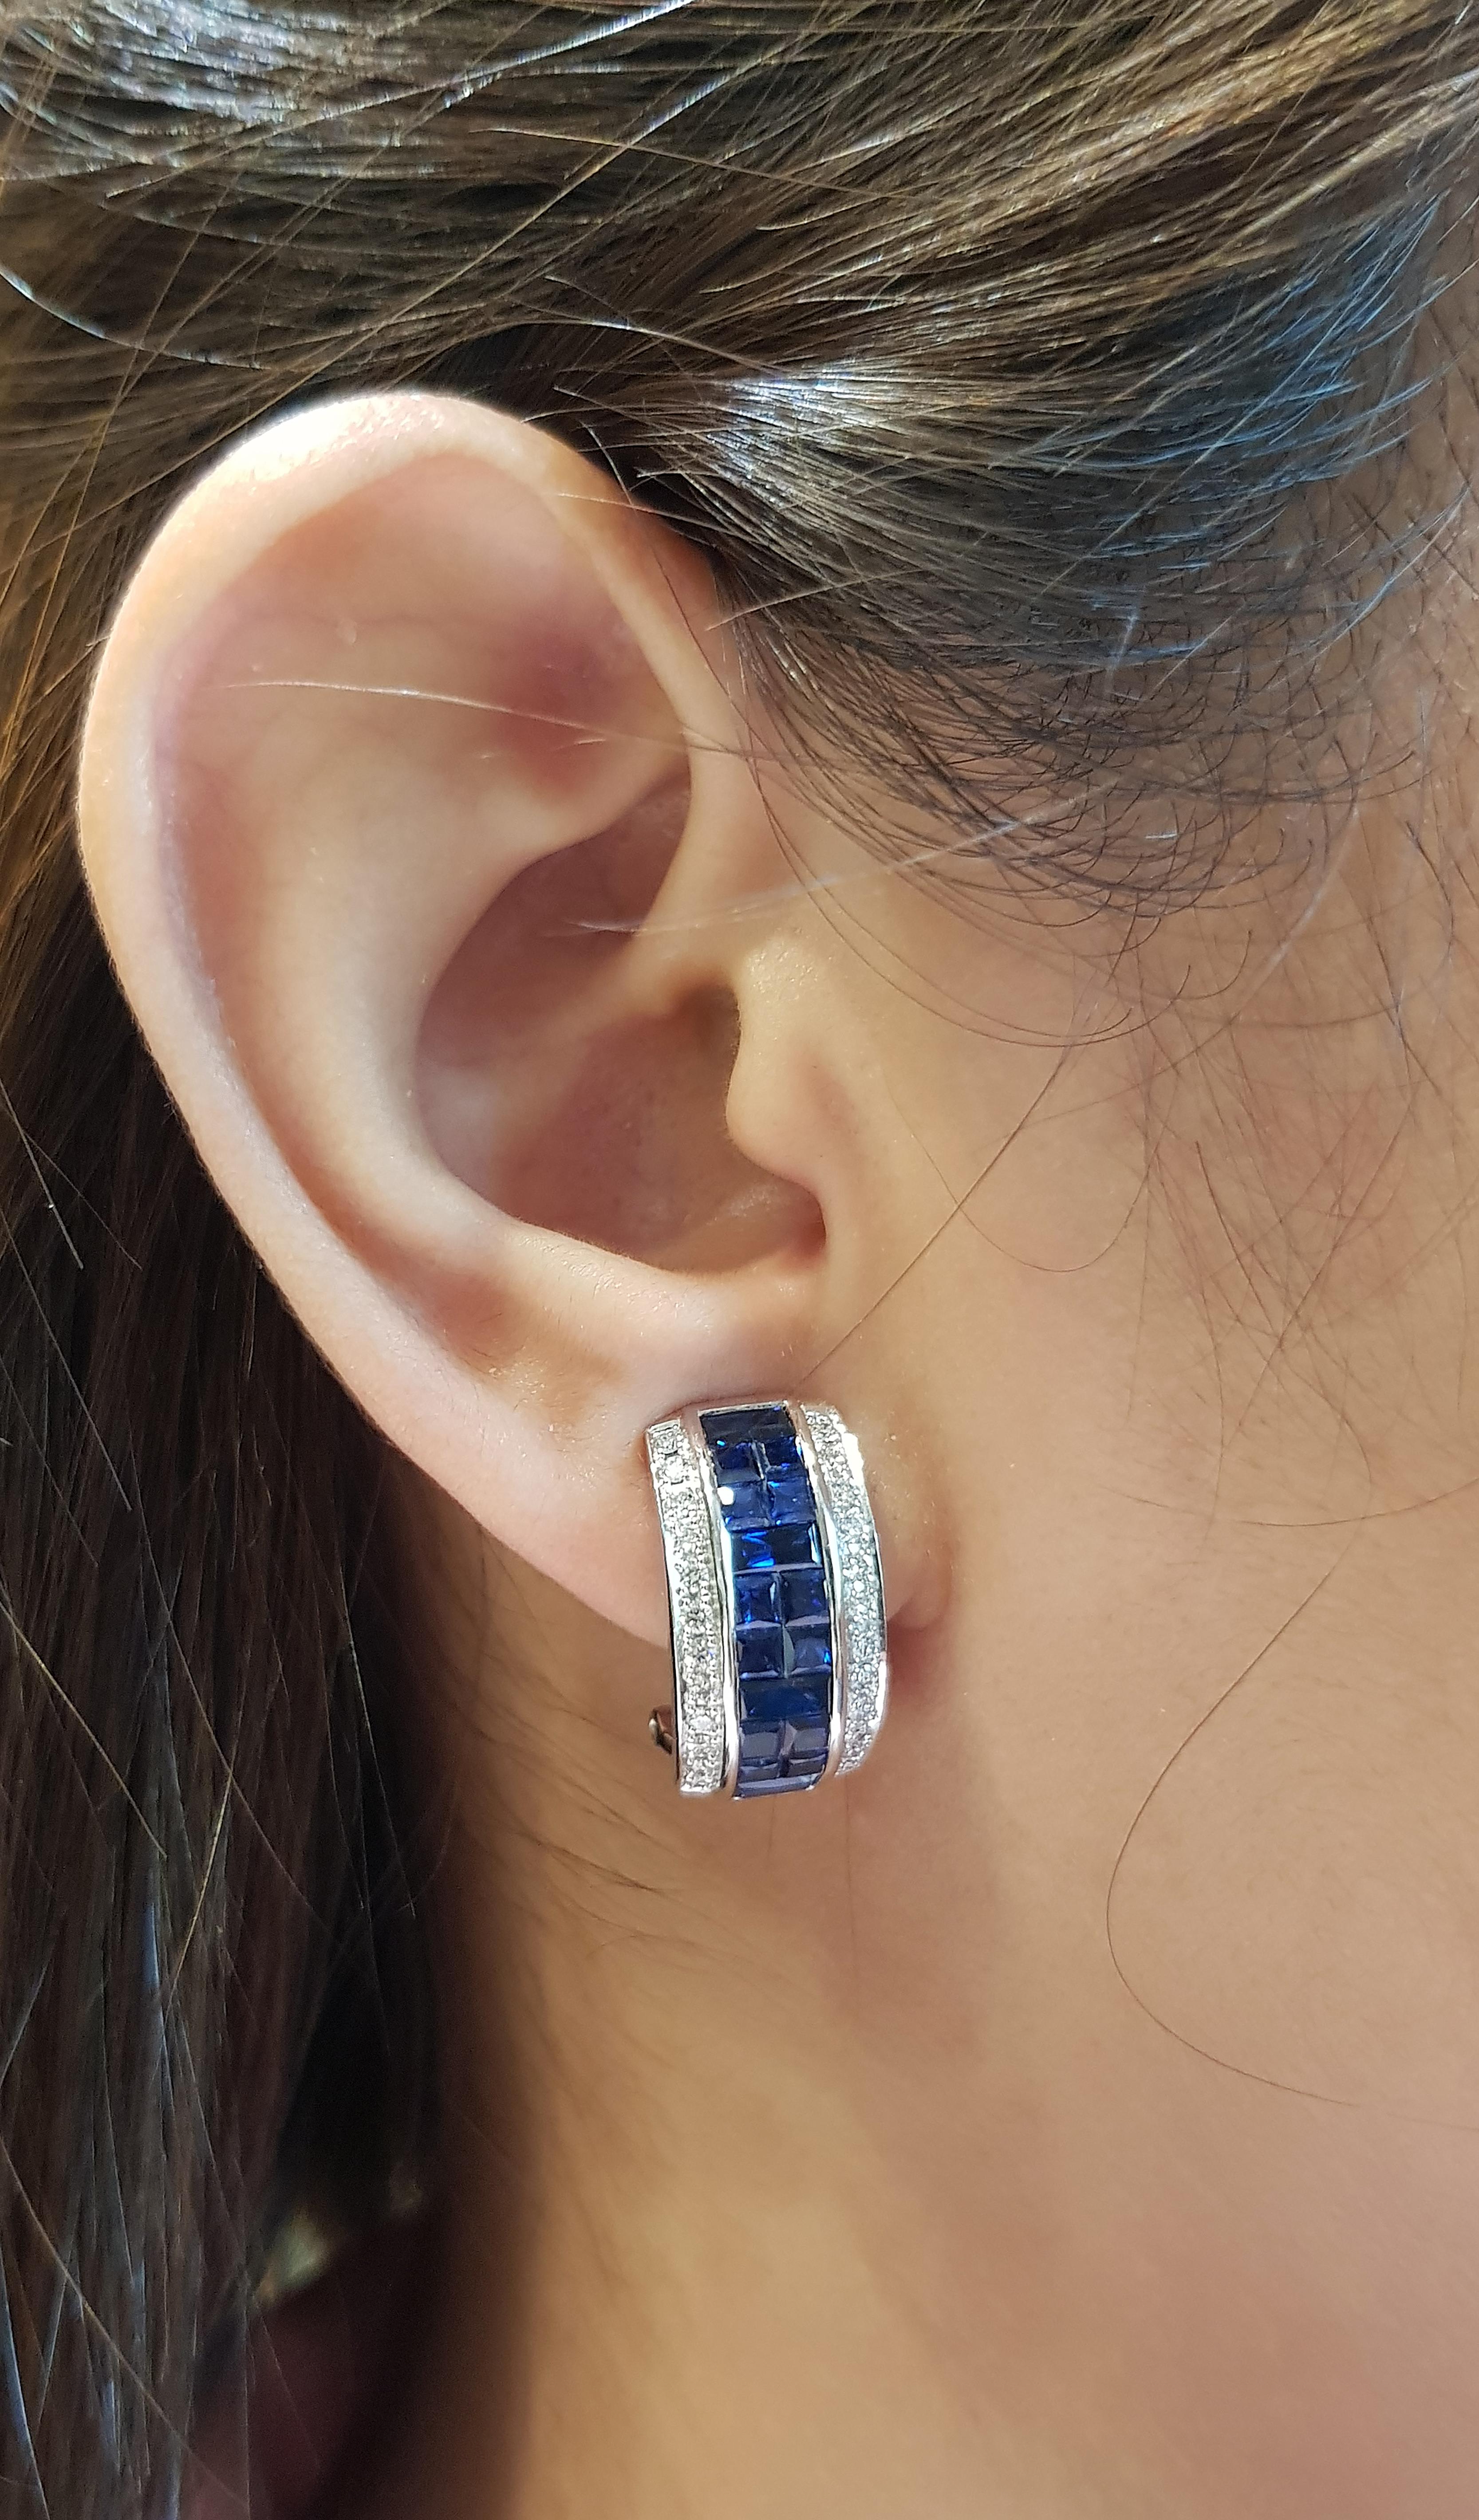 Blue Sapphire 5.18 carats with Diamond 0.57 carat Earrings set in 18 Karat White Gold Settings

Width:  1.0 cm 
Length: 1.9 cm
Total Weight: 10.55 grams

